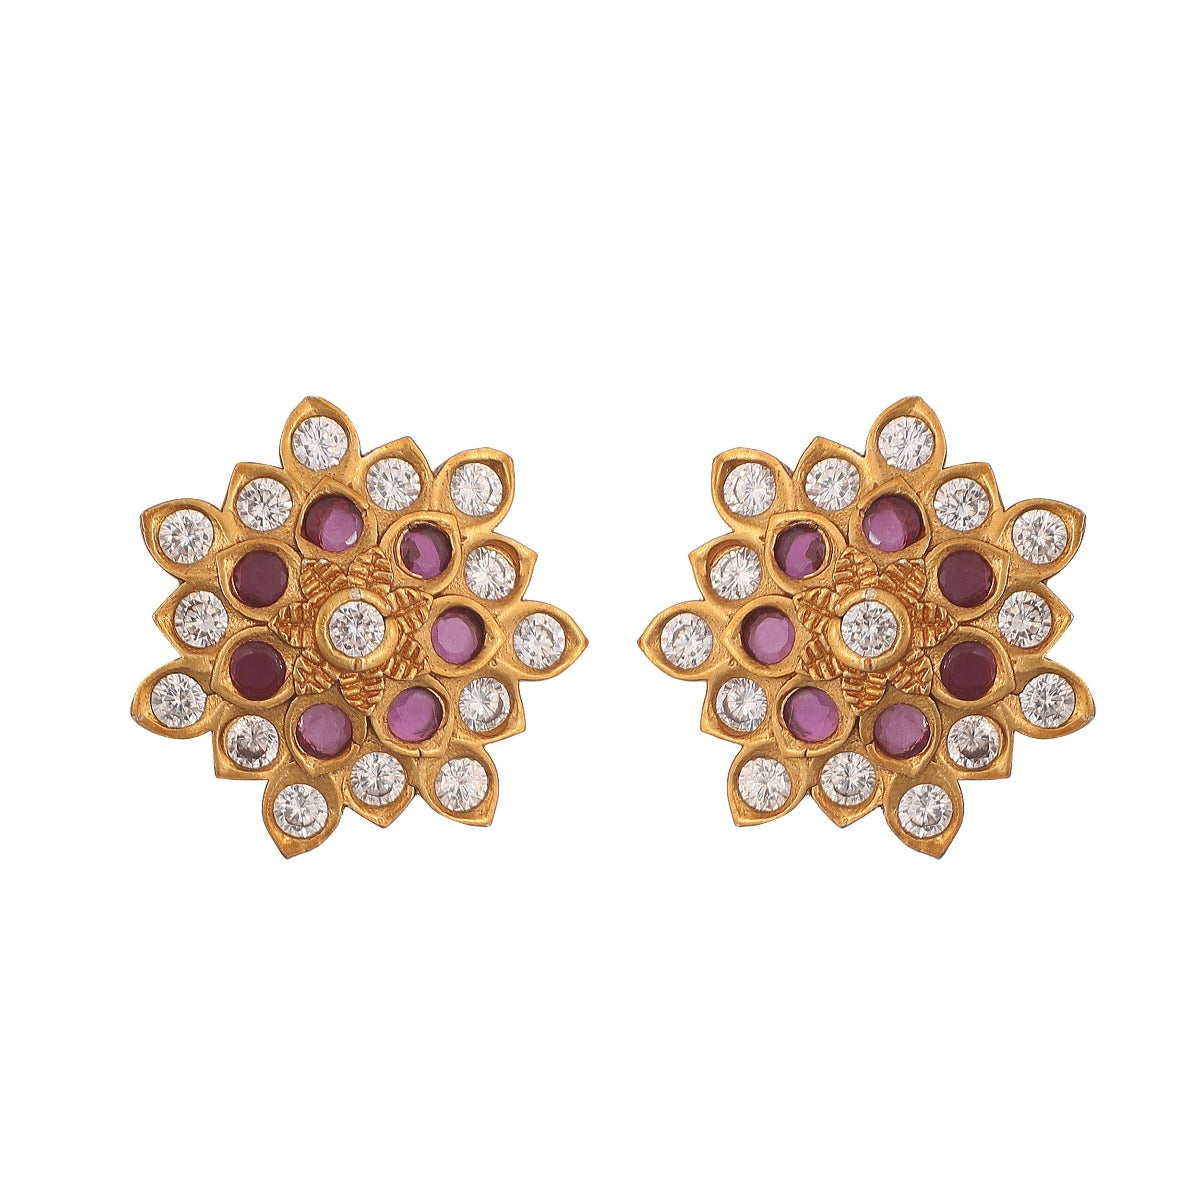 Antique Gold Plated Floral Small Stud Earrings